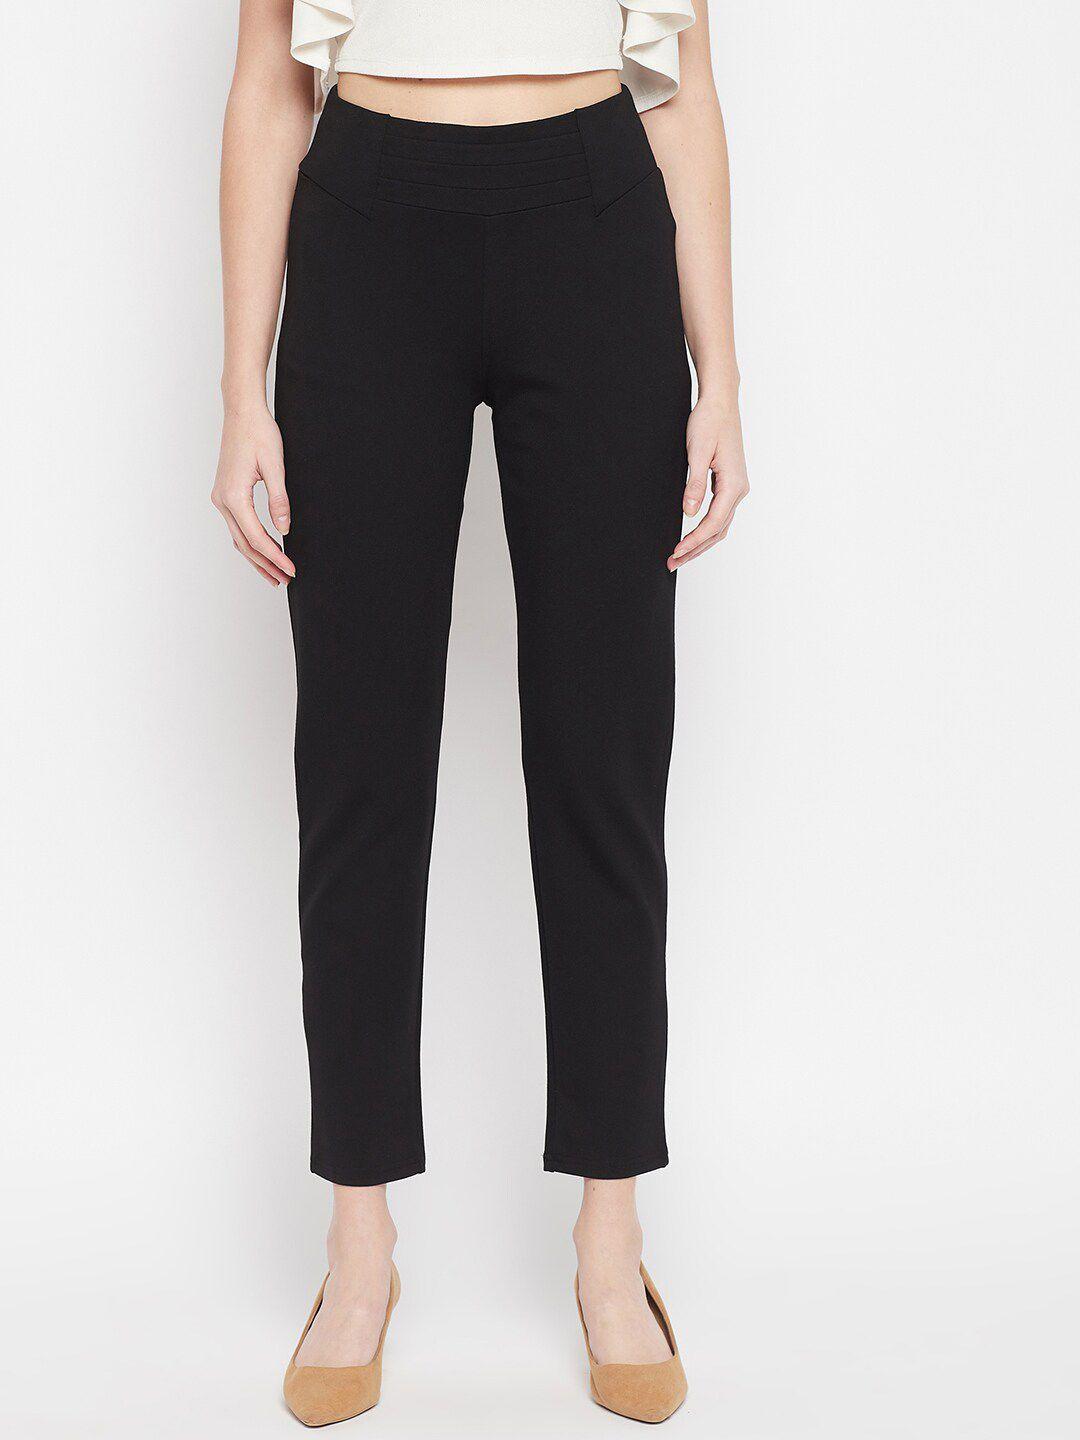 cantabil-women-black-solid-cotton-jegging